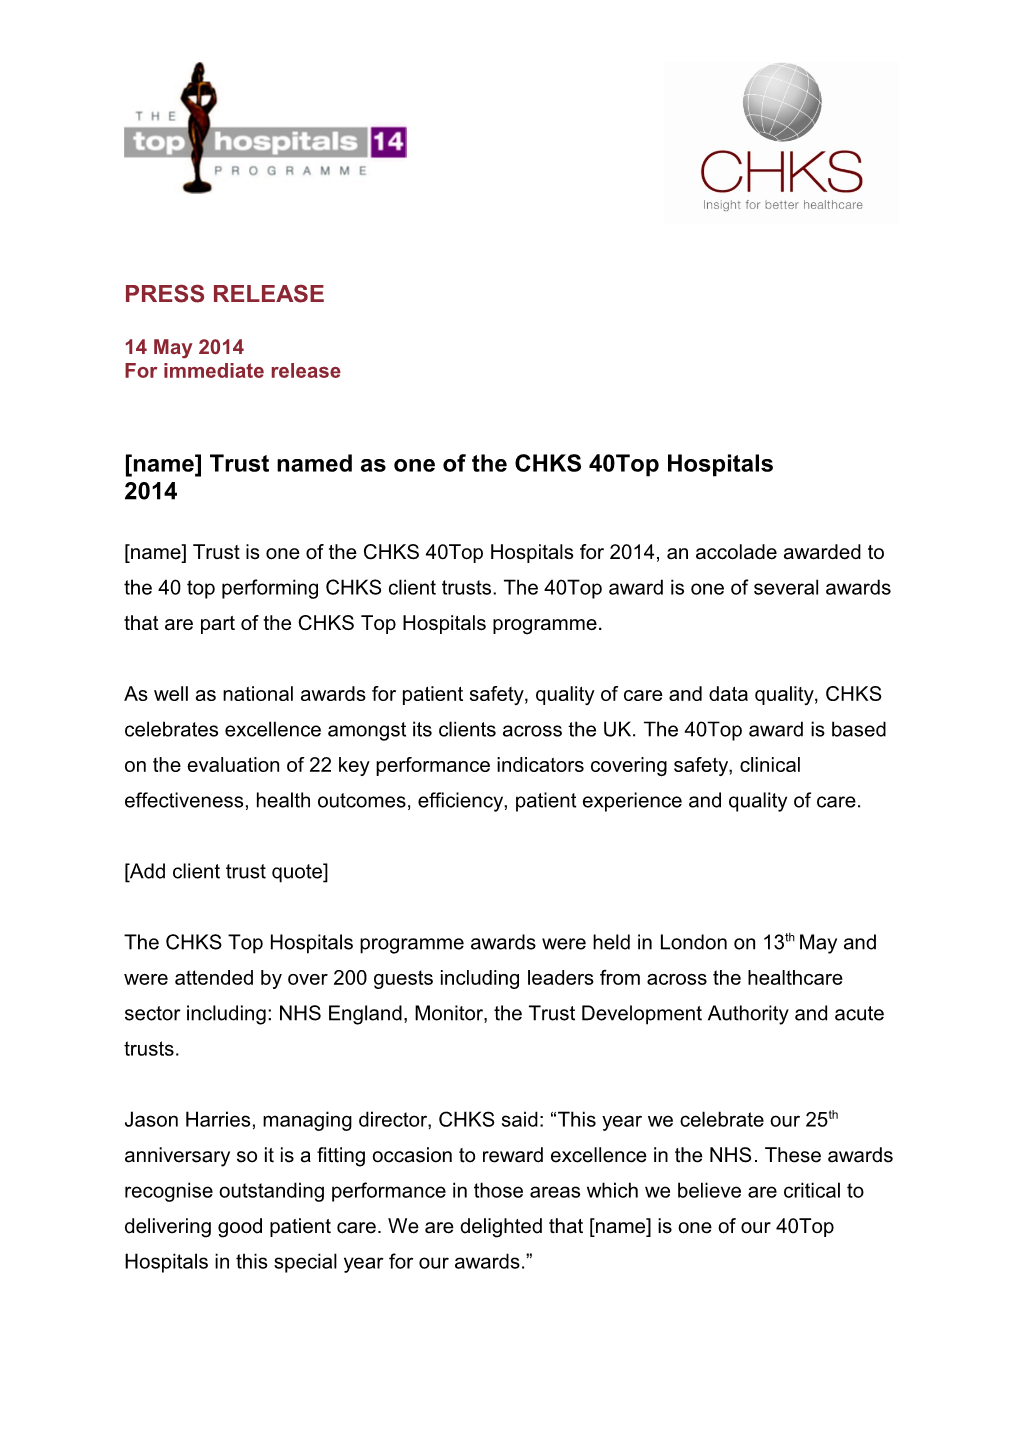 Name Trust Named As One of the CHKS 40Top Hospitals 2014